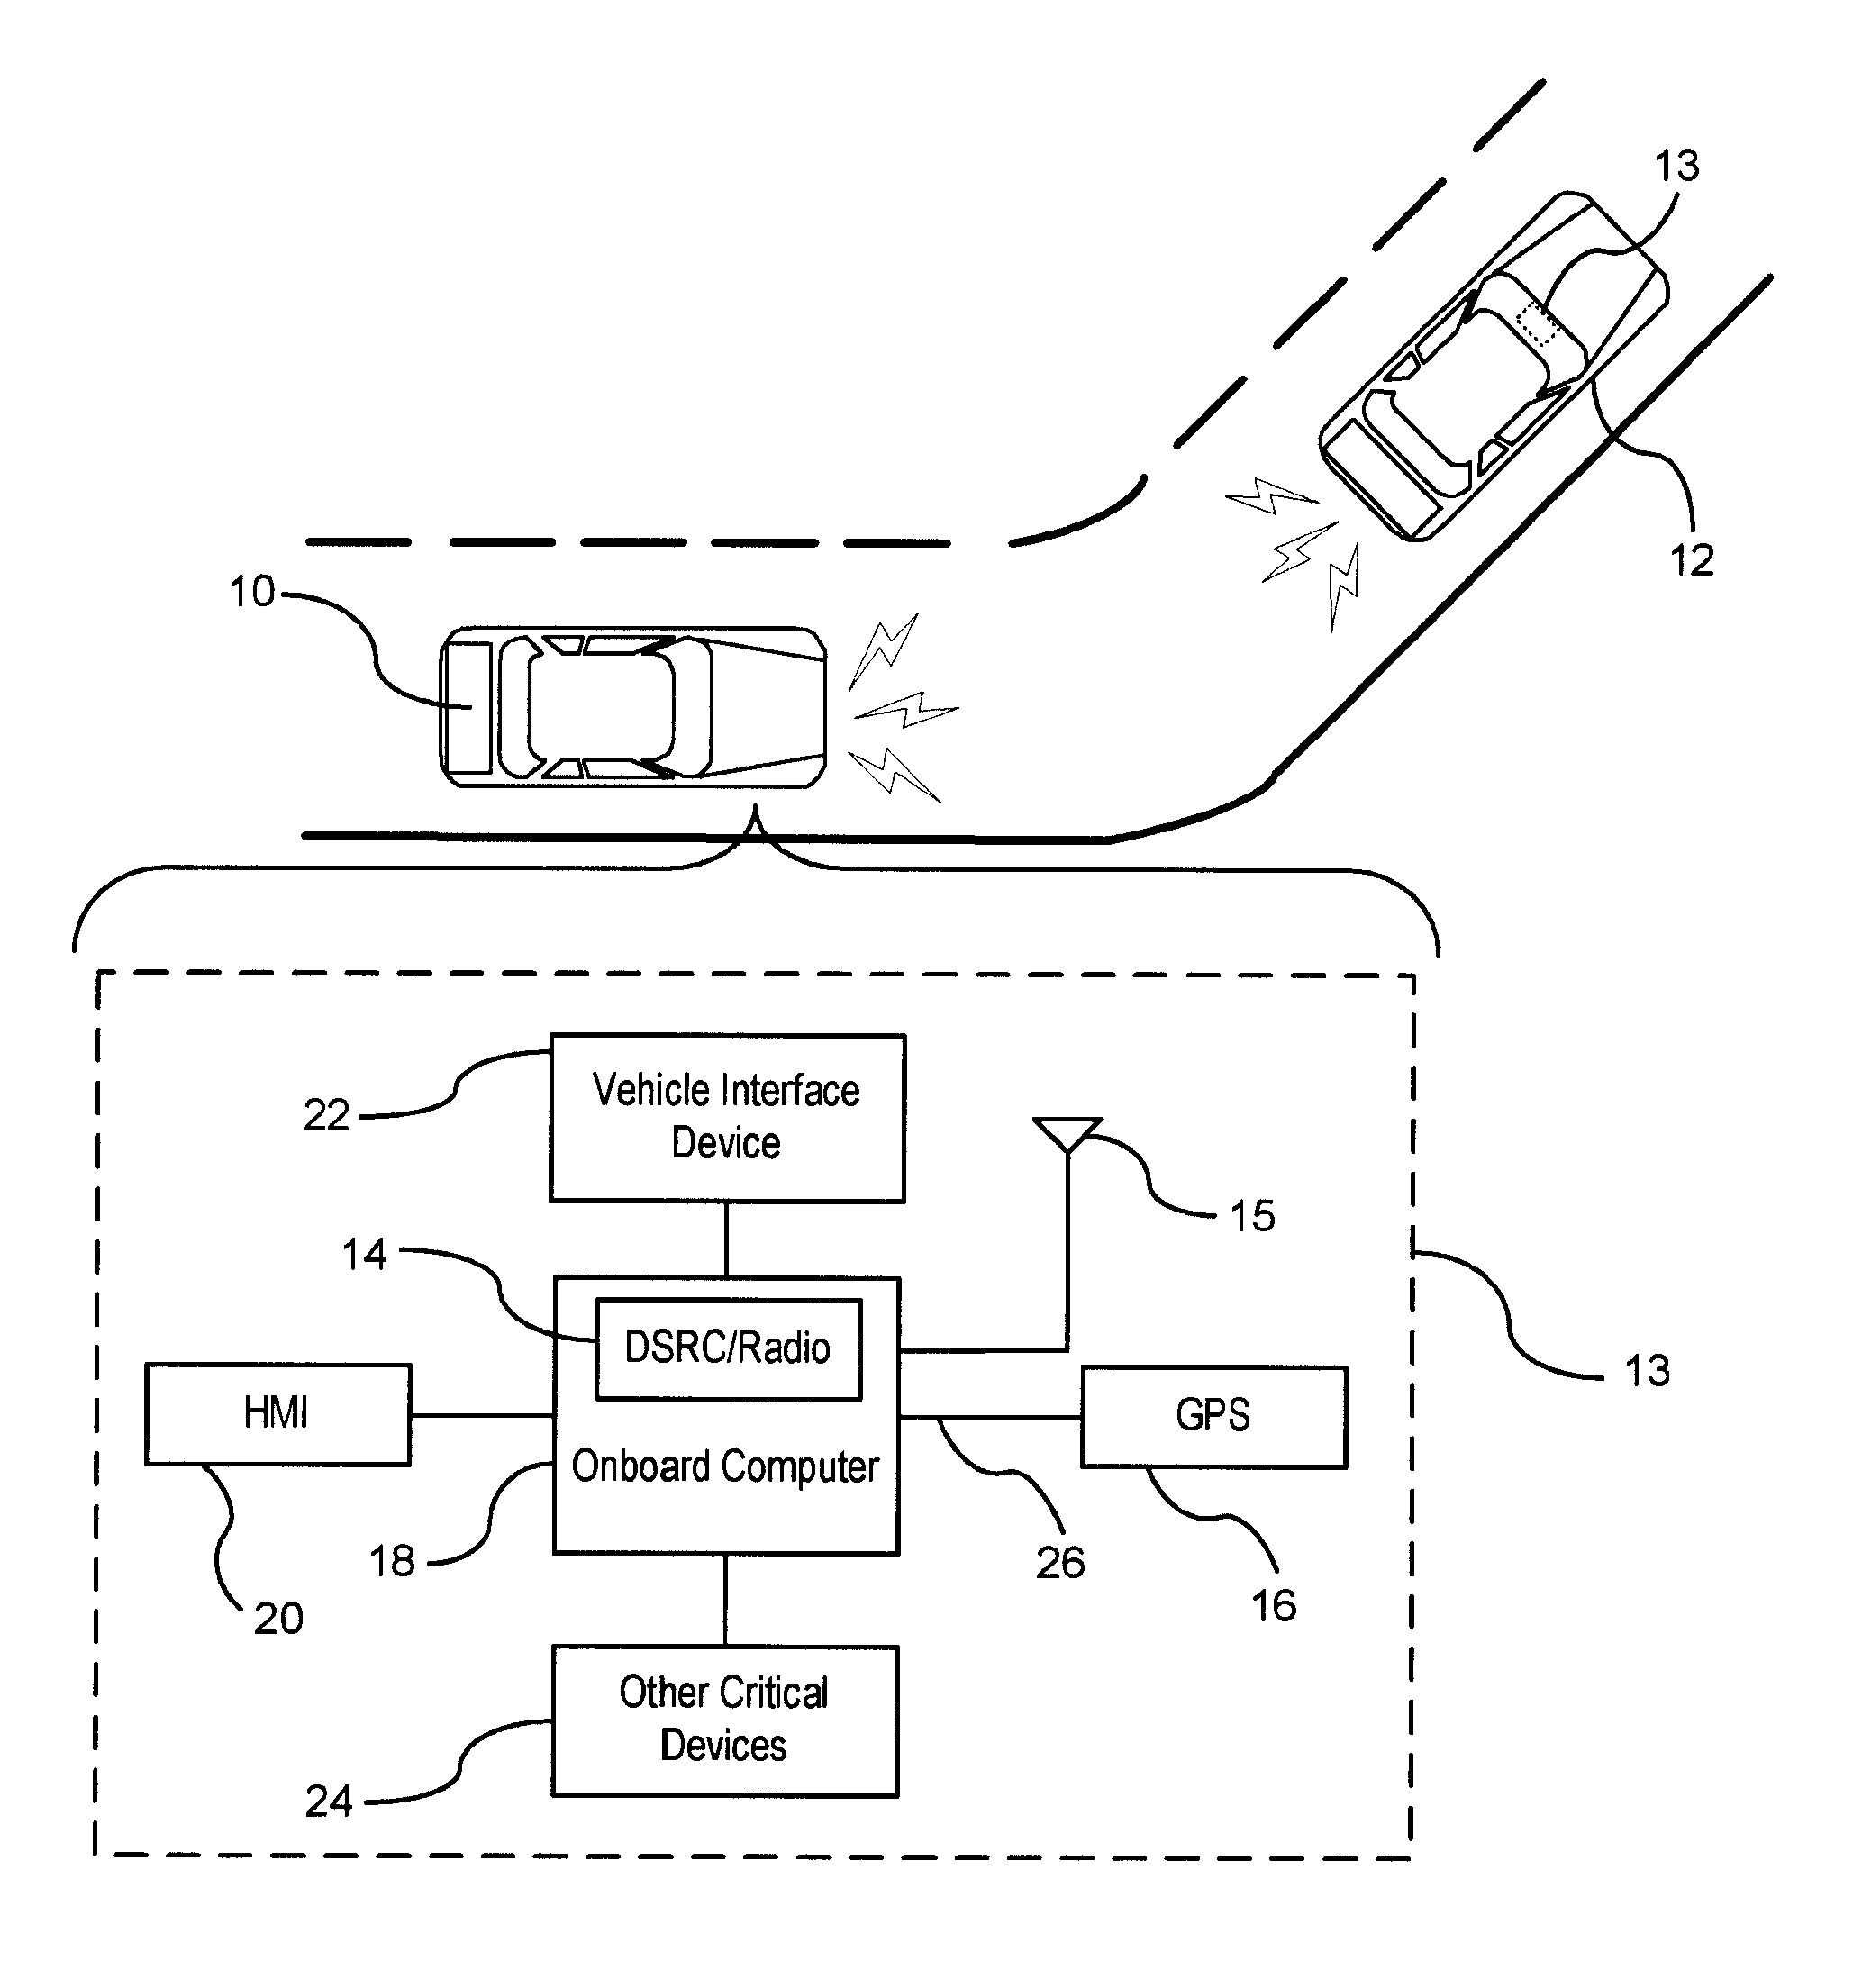 Inter-vehicle communication feature awareness and diagnosis system